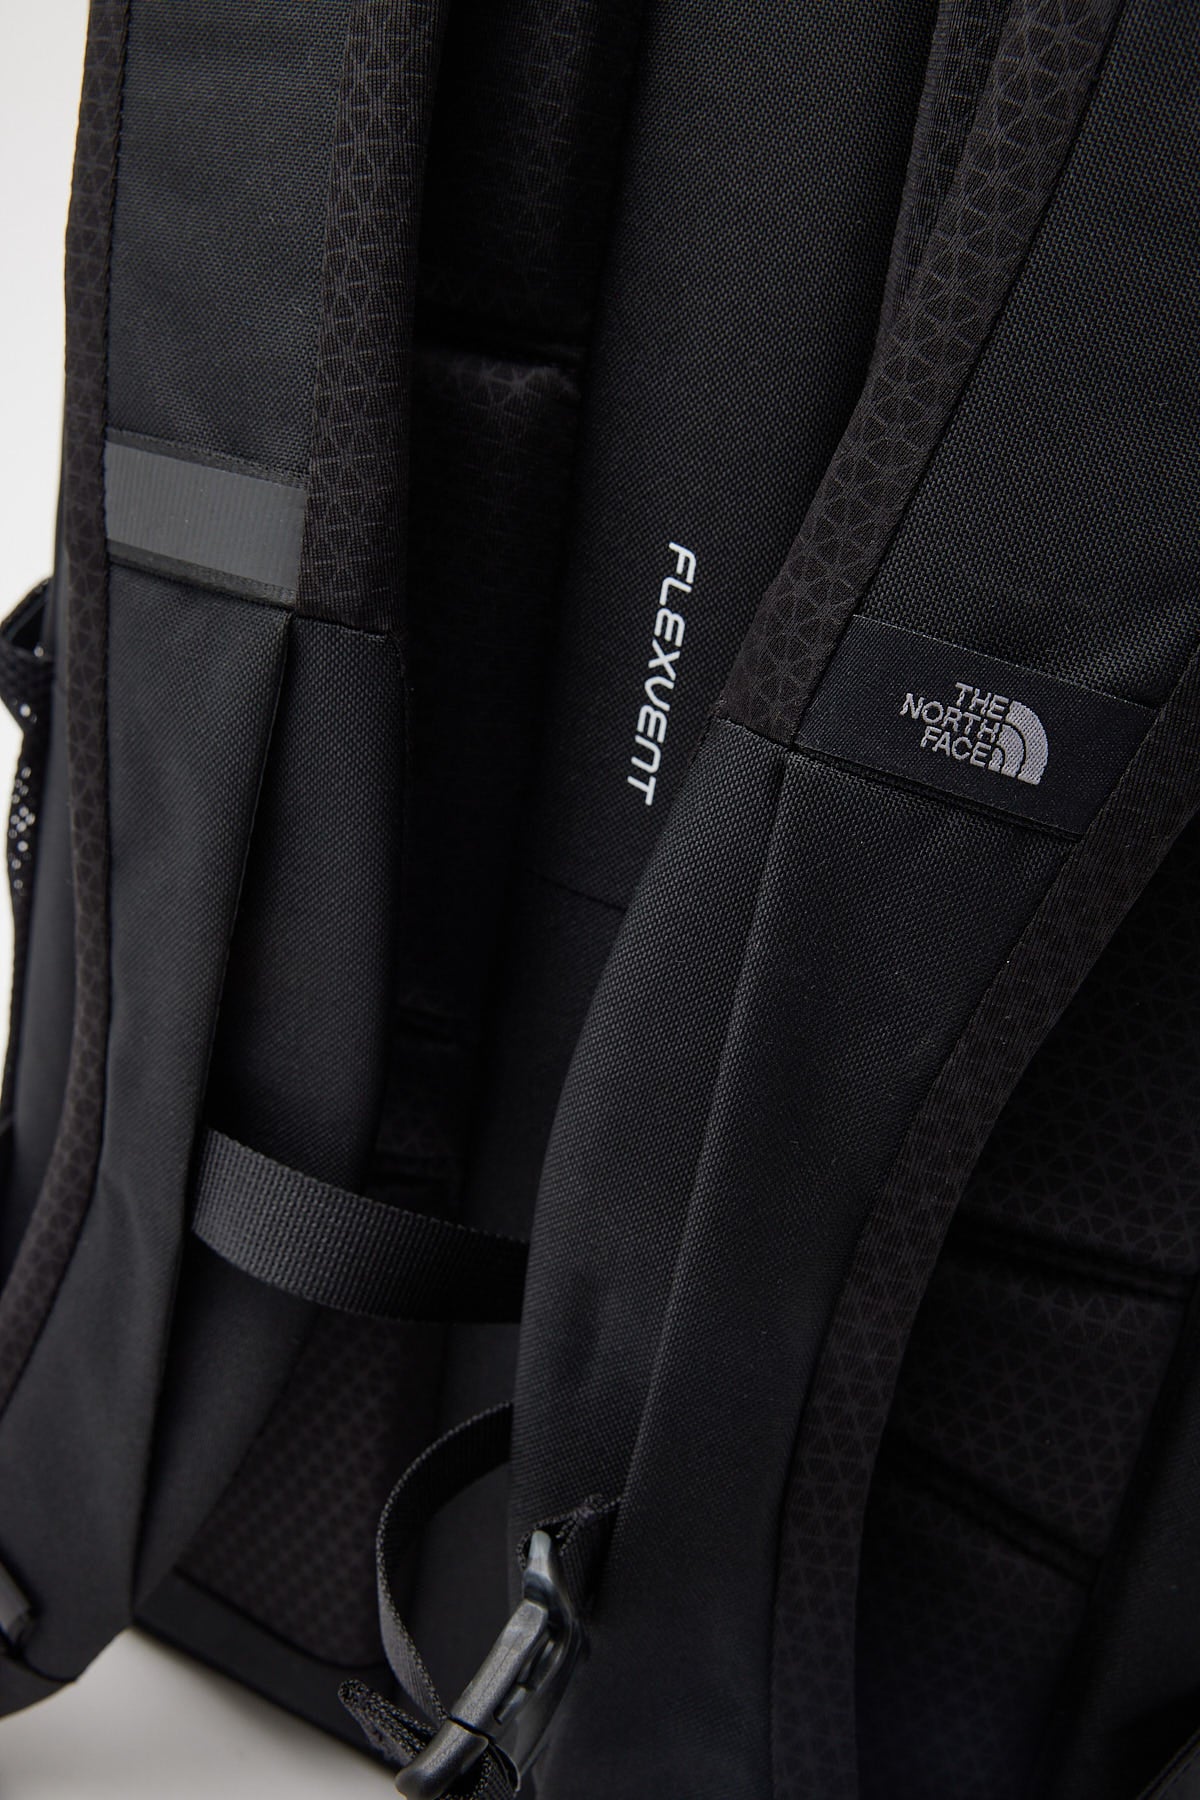 The North Face Jester Backpack Black